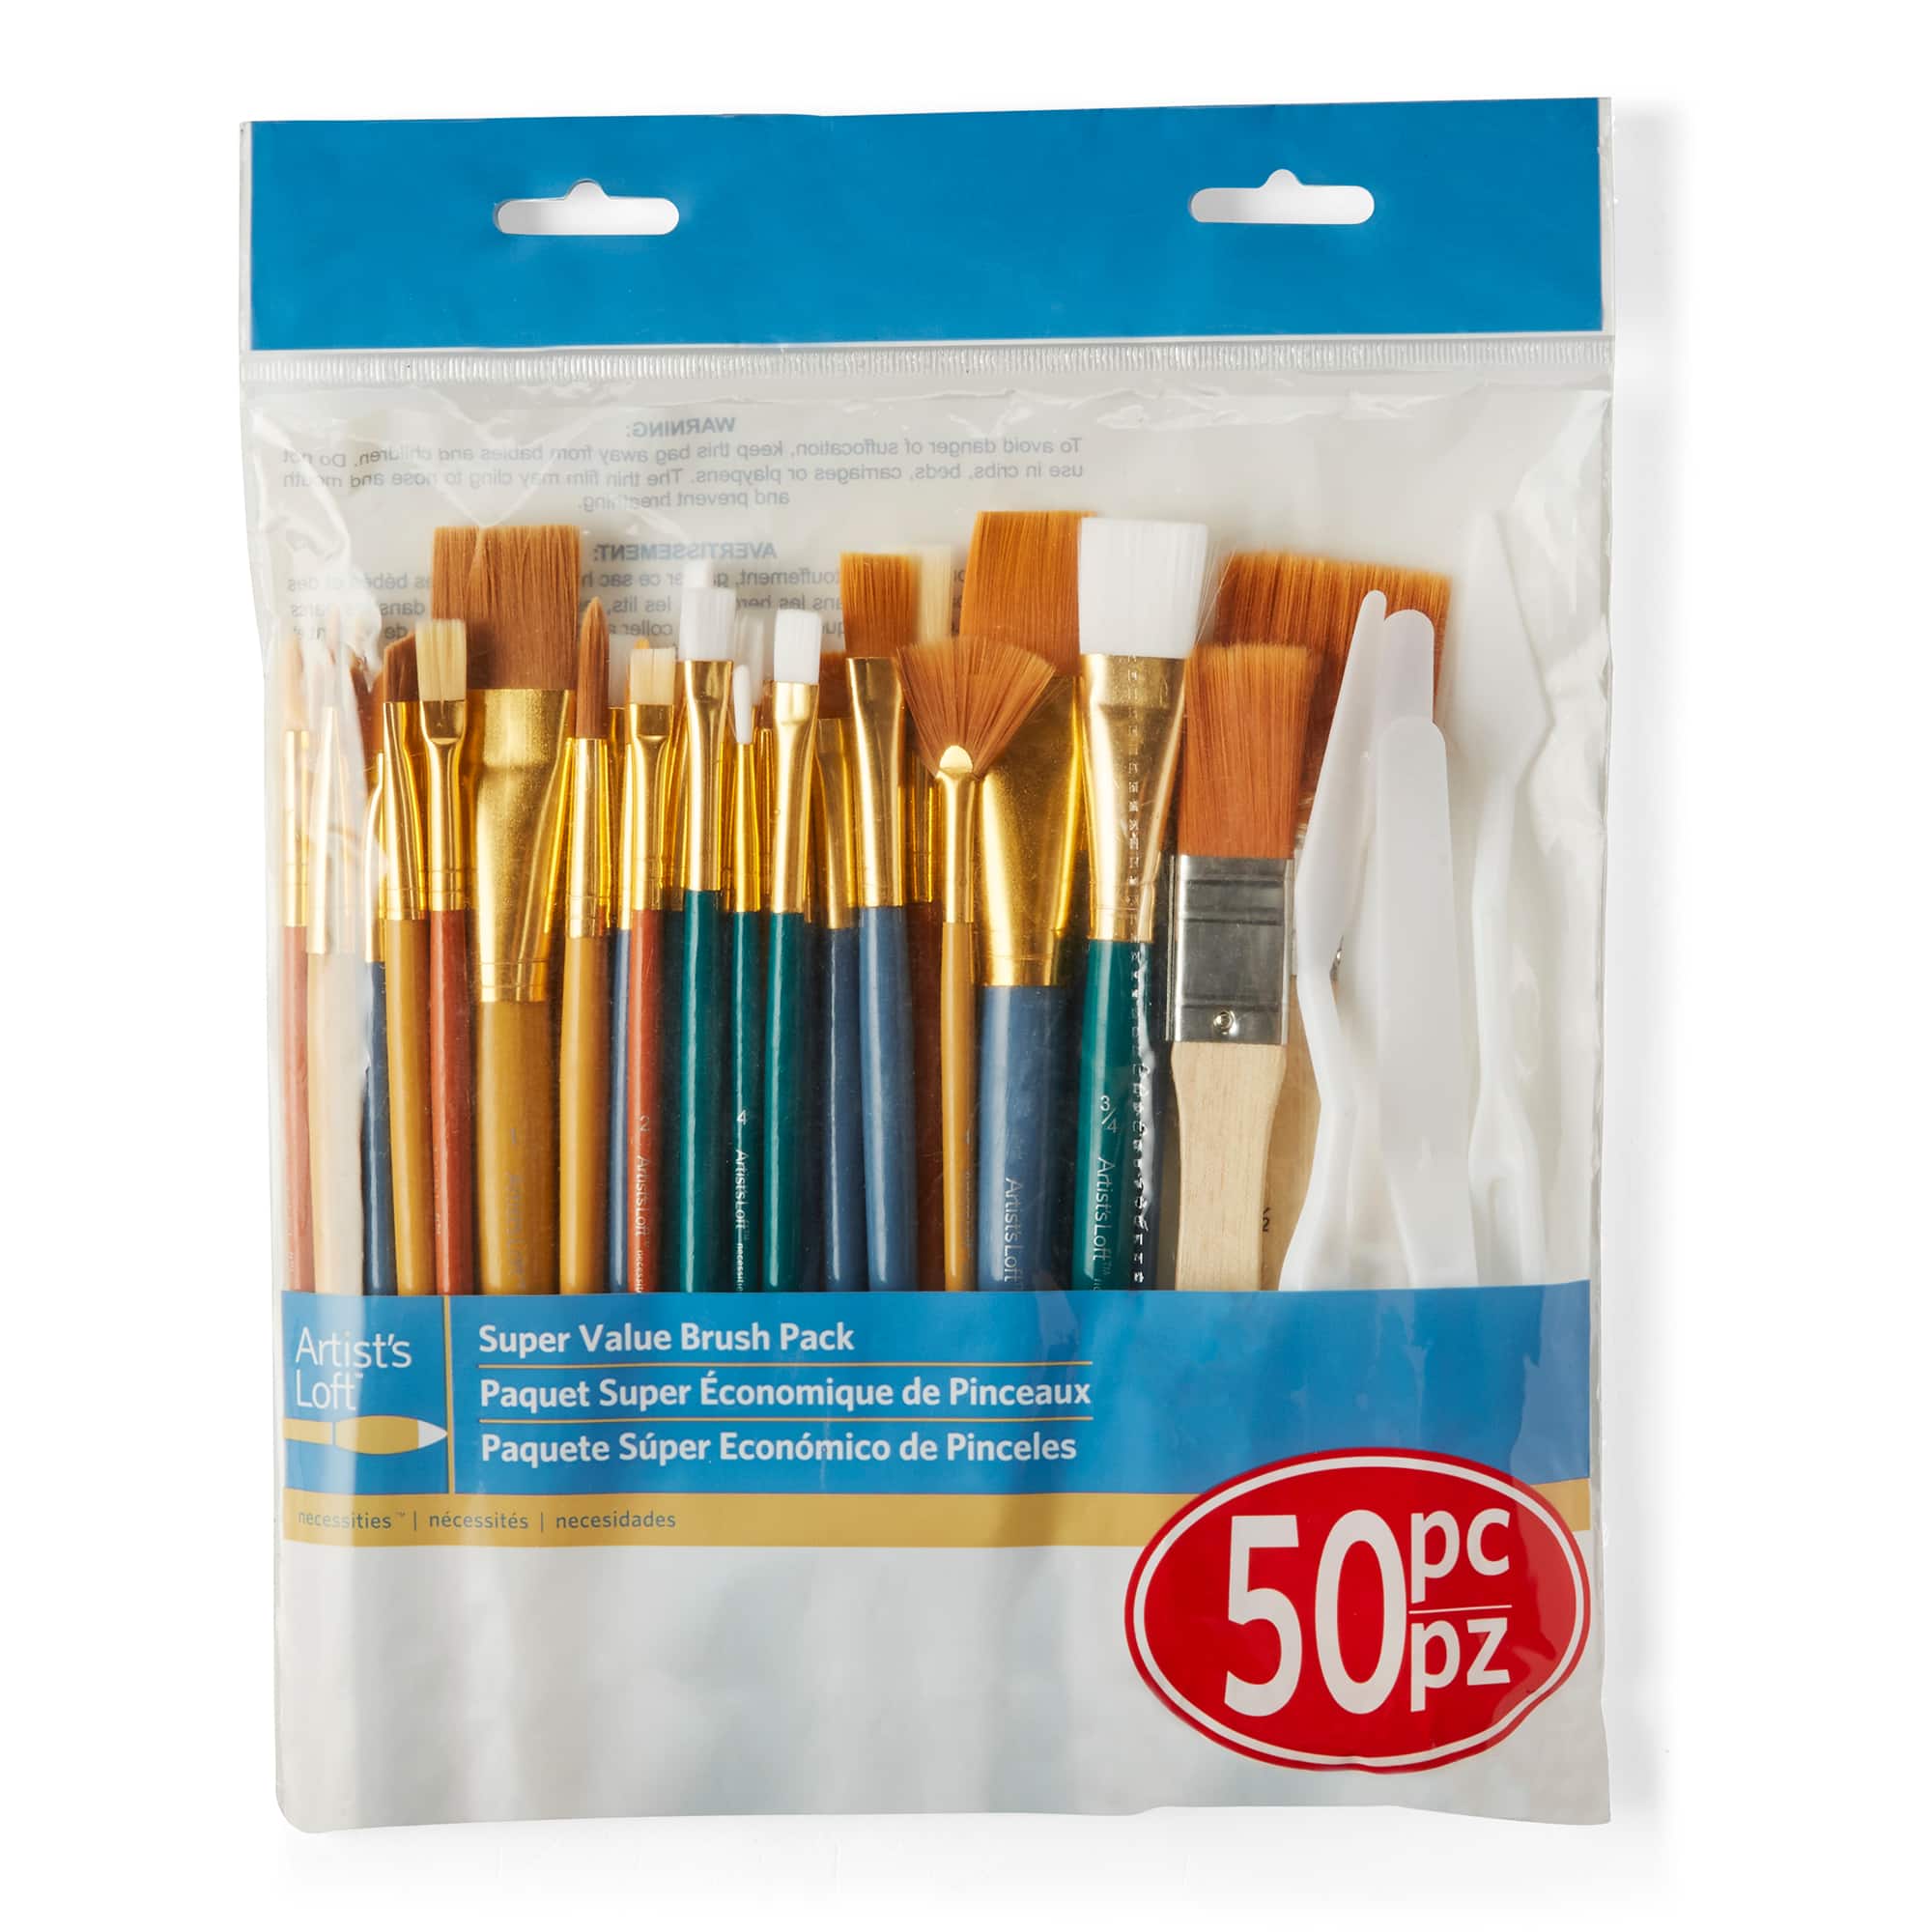 12 Packs: 6 Ct. (72 Total) Acid and Glue Brushes by Craft Smart | Michaels